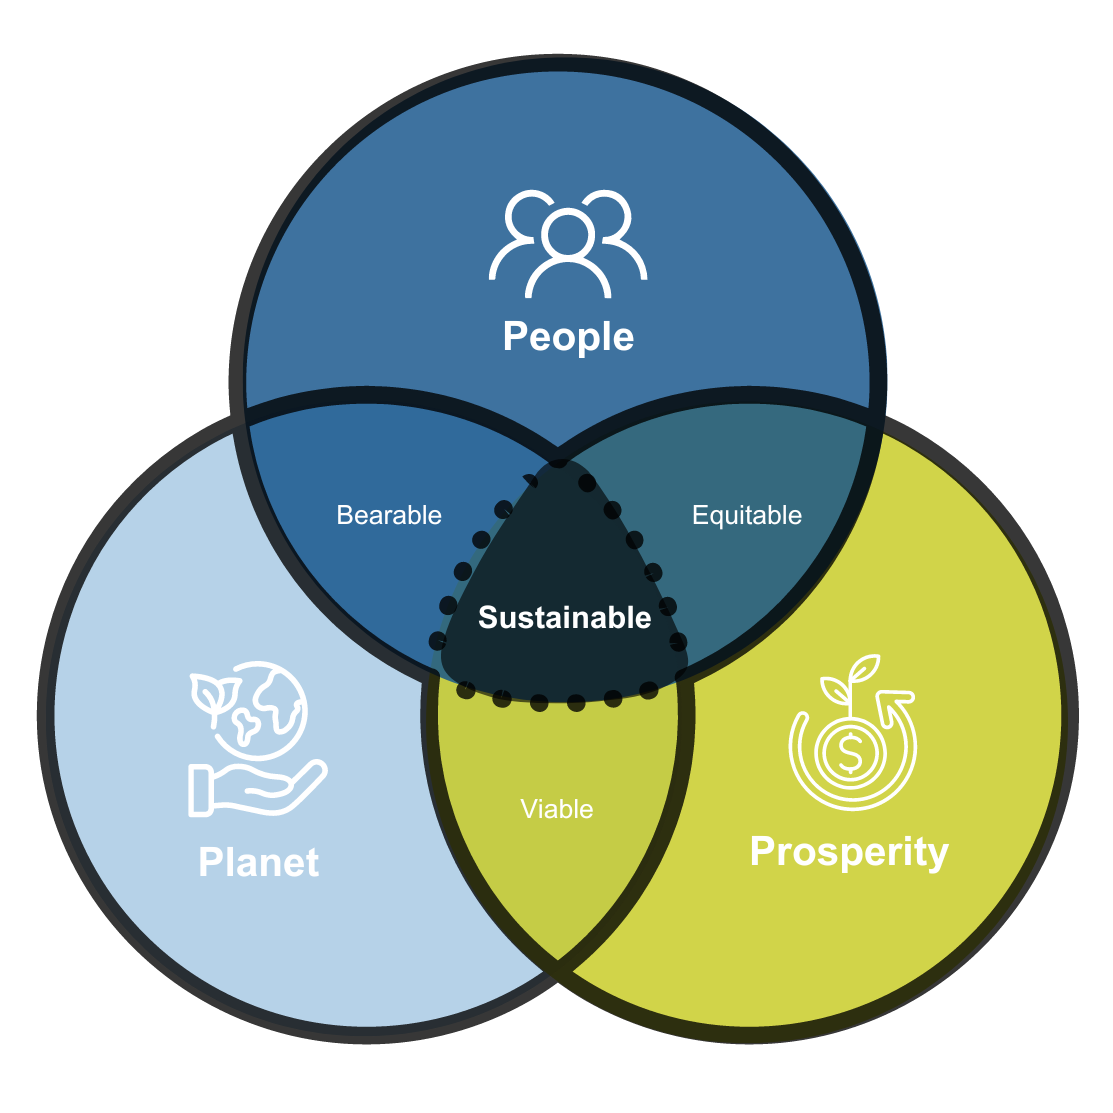 Venn diagram of the three pillars of sustainability: : 'Planet' (blue), 'People' (dark blue), 'Prosperity' (yellow). Intersections are labeled 'Bearable,' 'Viable,' 'Equitable.' The center reads 'Sustainable.